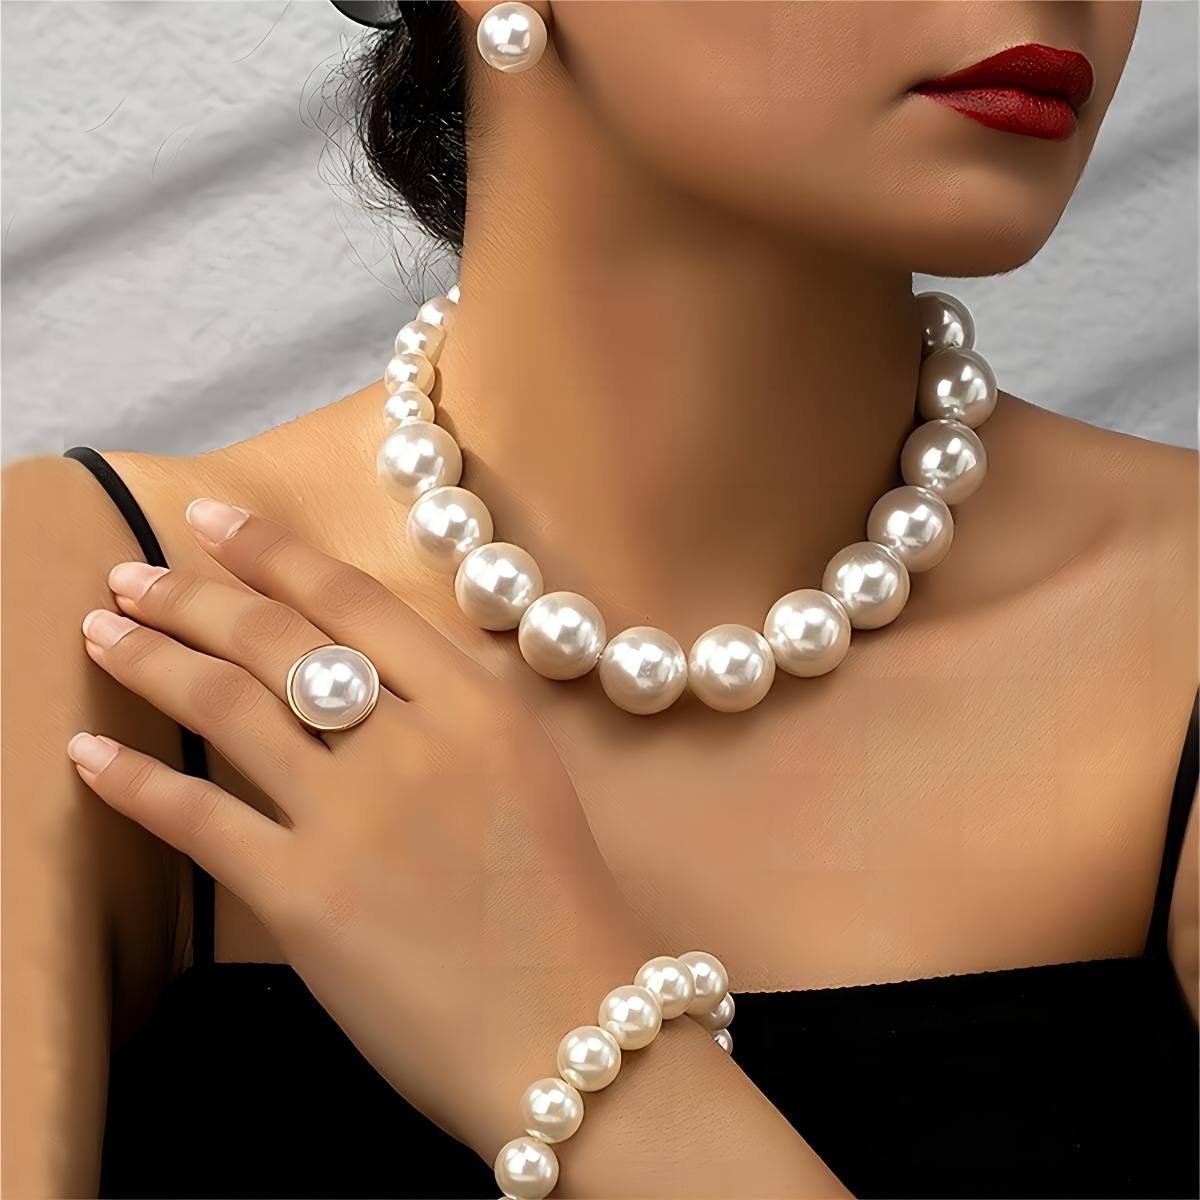 

Elegant 5-piece Faux Pearl Jewelry Set For Women, Vintage French-inspired Luxe Style, Includes Necklace, Bracelet, Earrings, And Ring, Sexy And Cute Fashion Accessories For Weddings